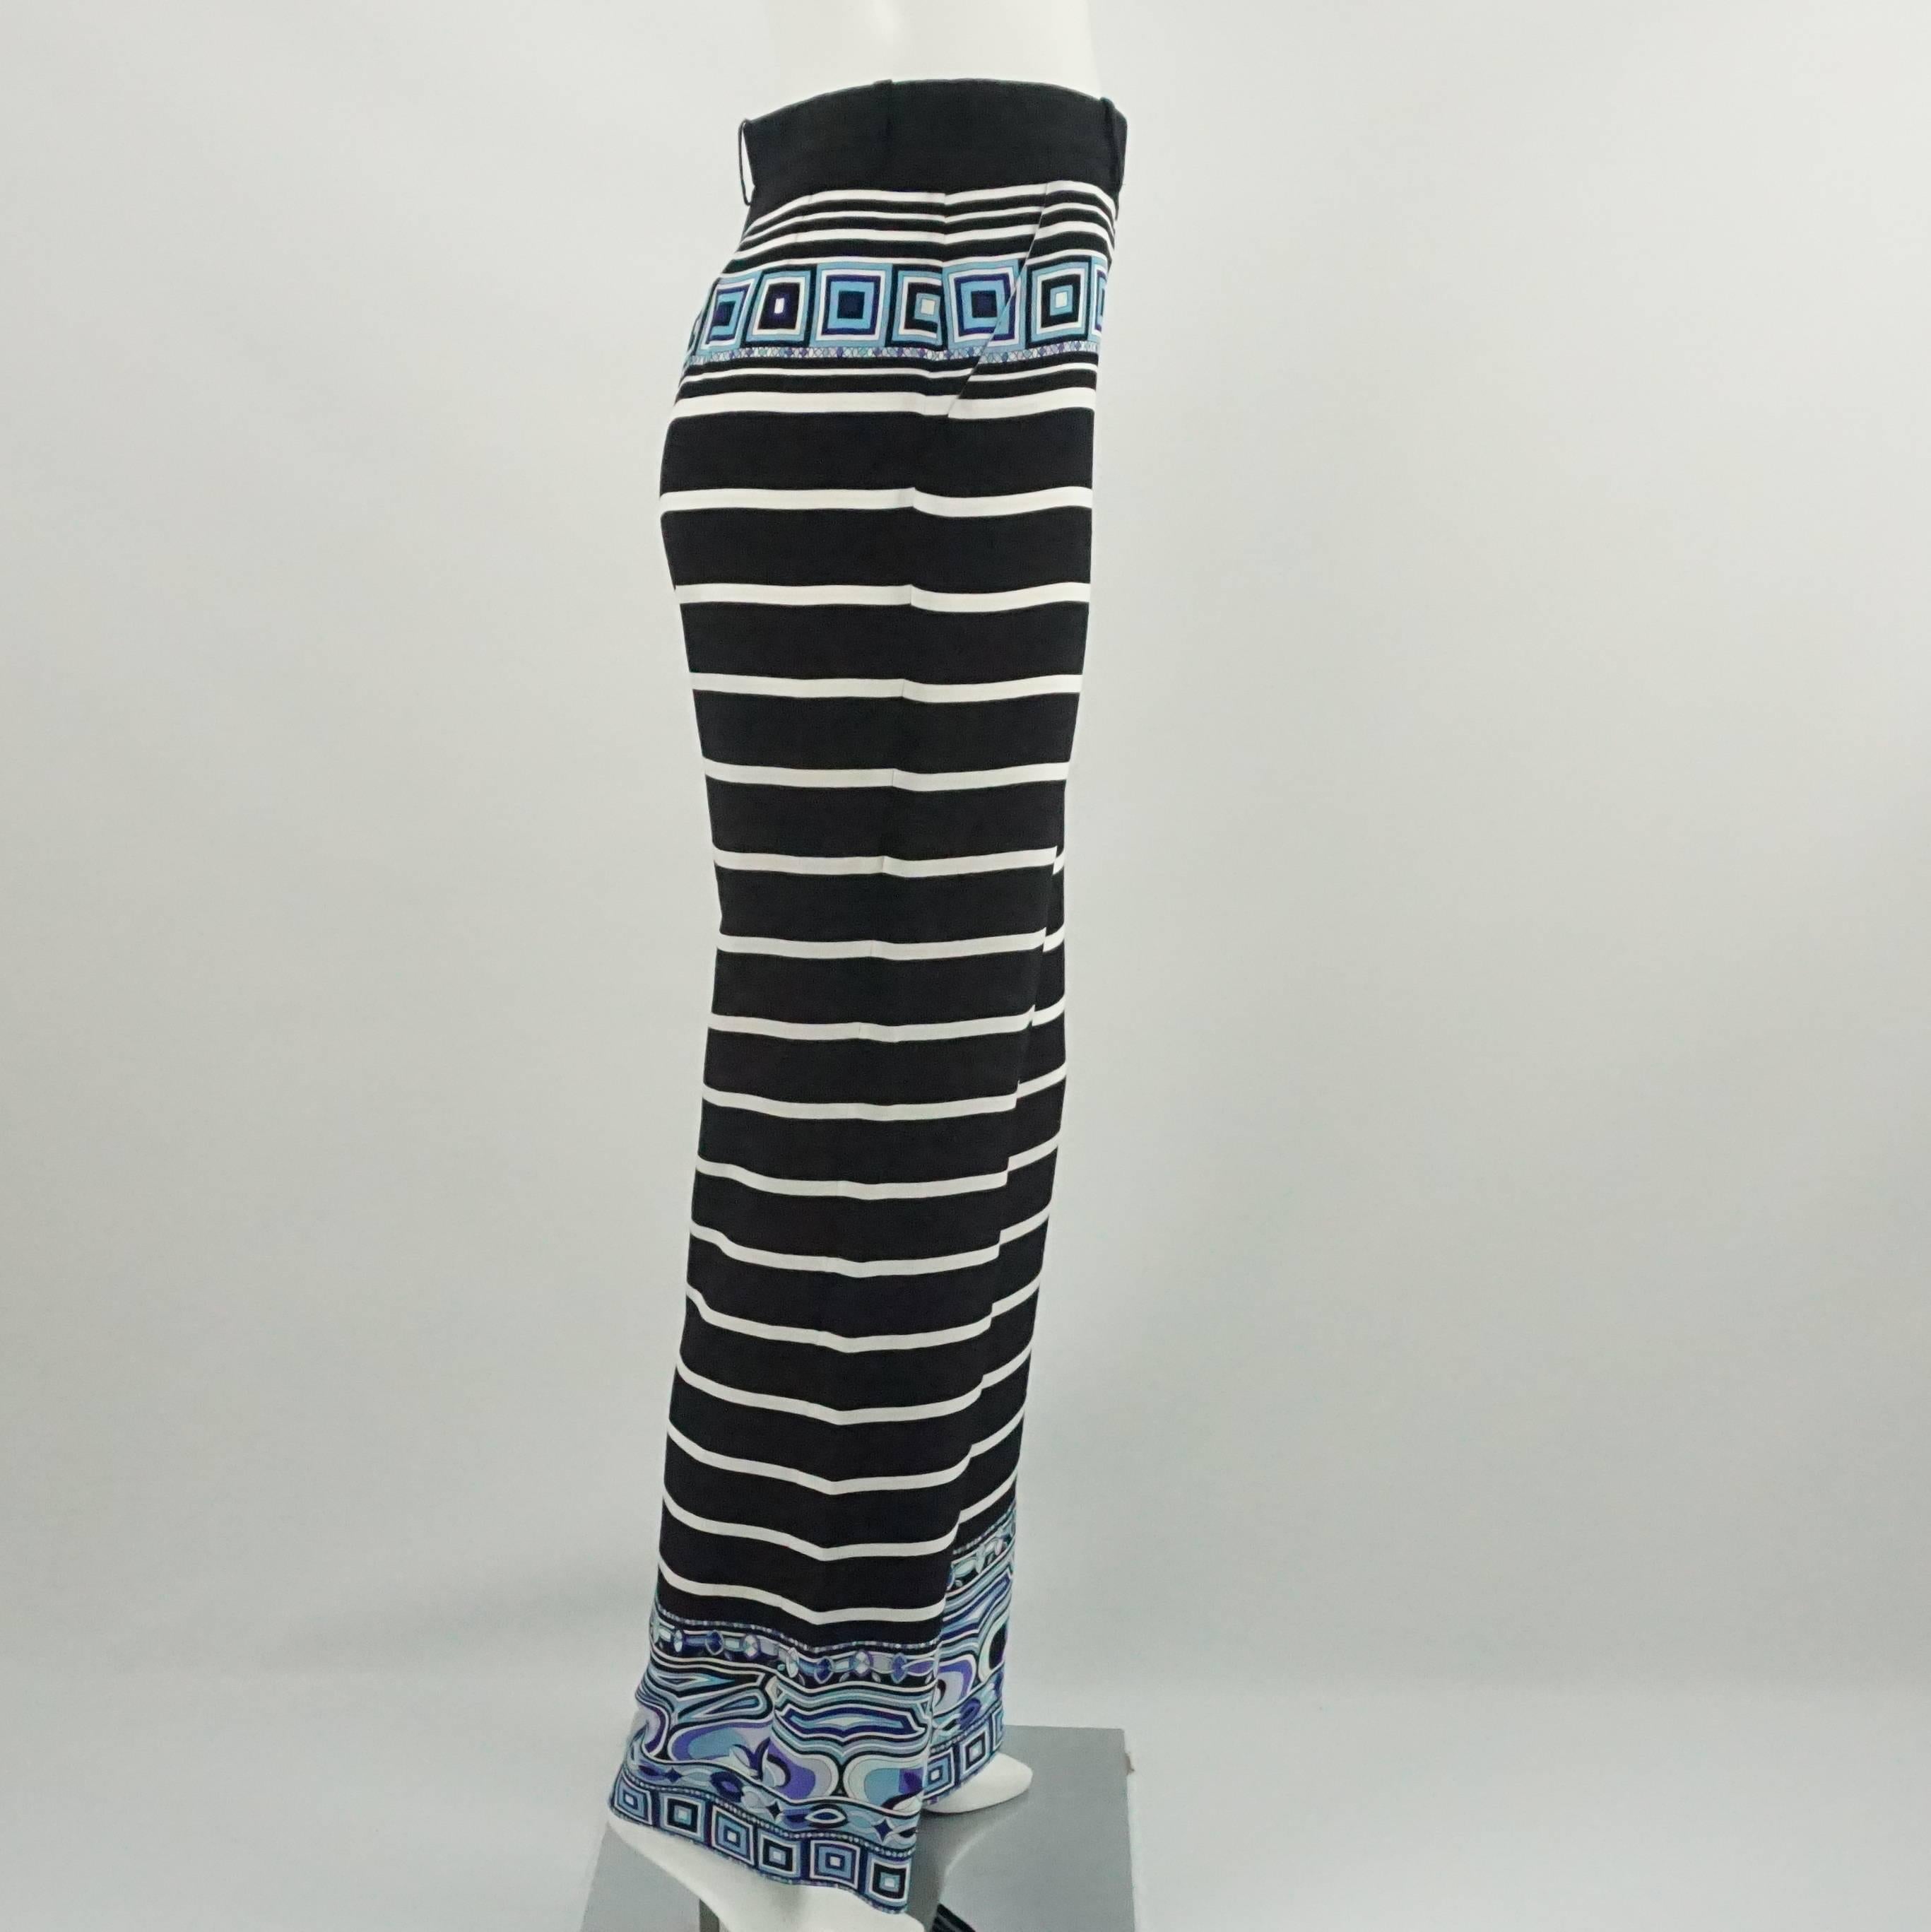 These Emilio Pucci silk palazzo pants are black with white stripes and blue pattern detailing at the waist and at the bottom of the legs. There are belt loops and a zipper. They are in excellent condition. 

Measurement
Waist: 28.5